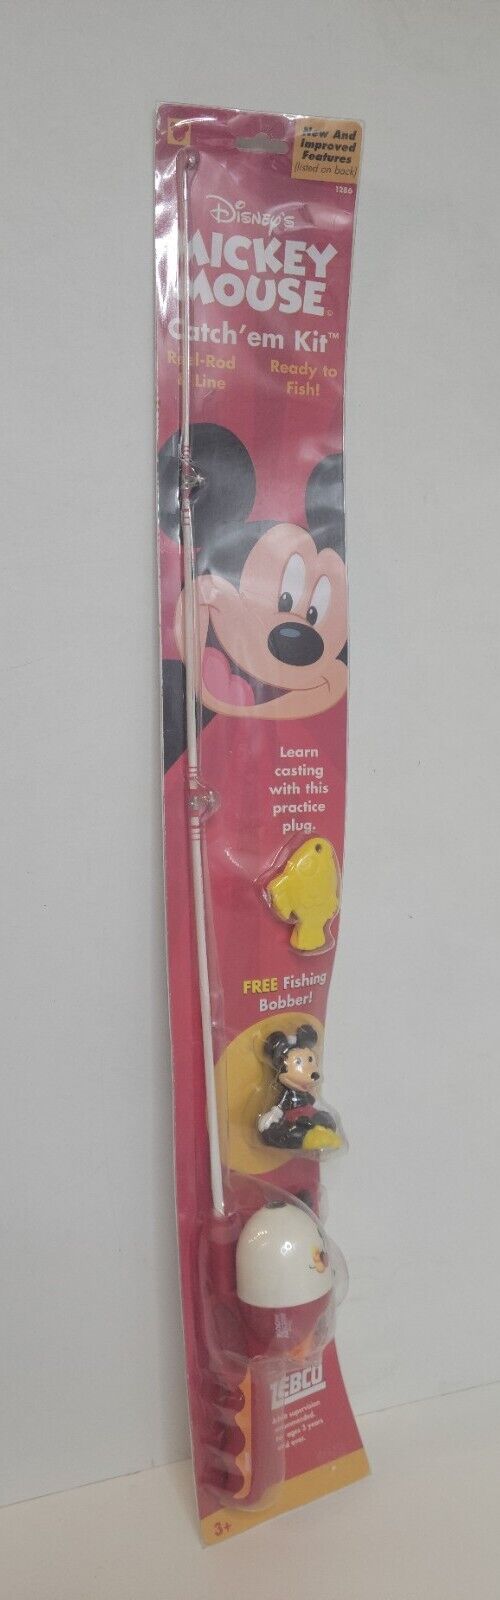 Vintage Zebco Disney Mickey Mouse Fishing Pole Rod & Reel Factory Sealed 2001